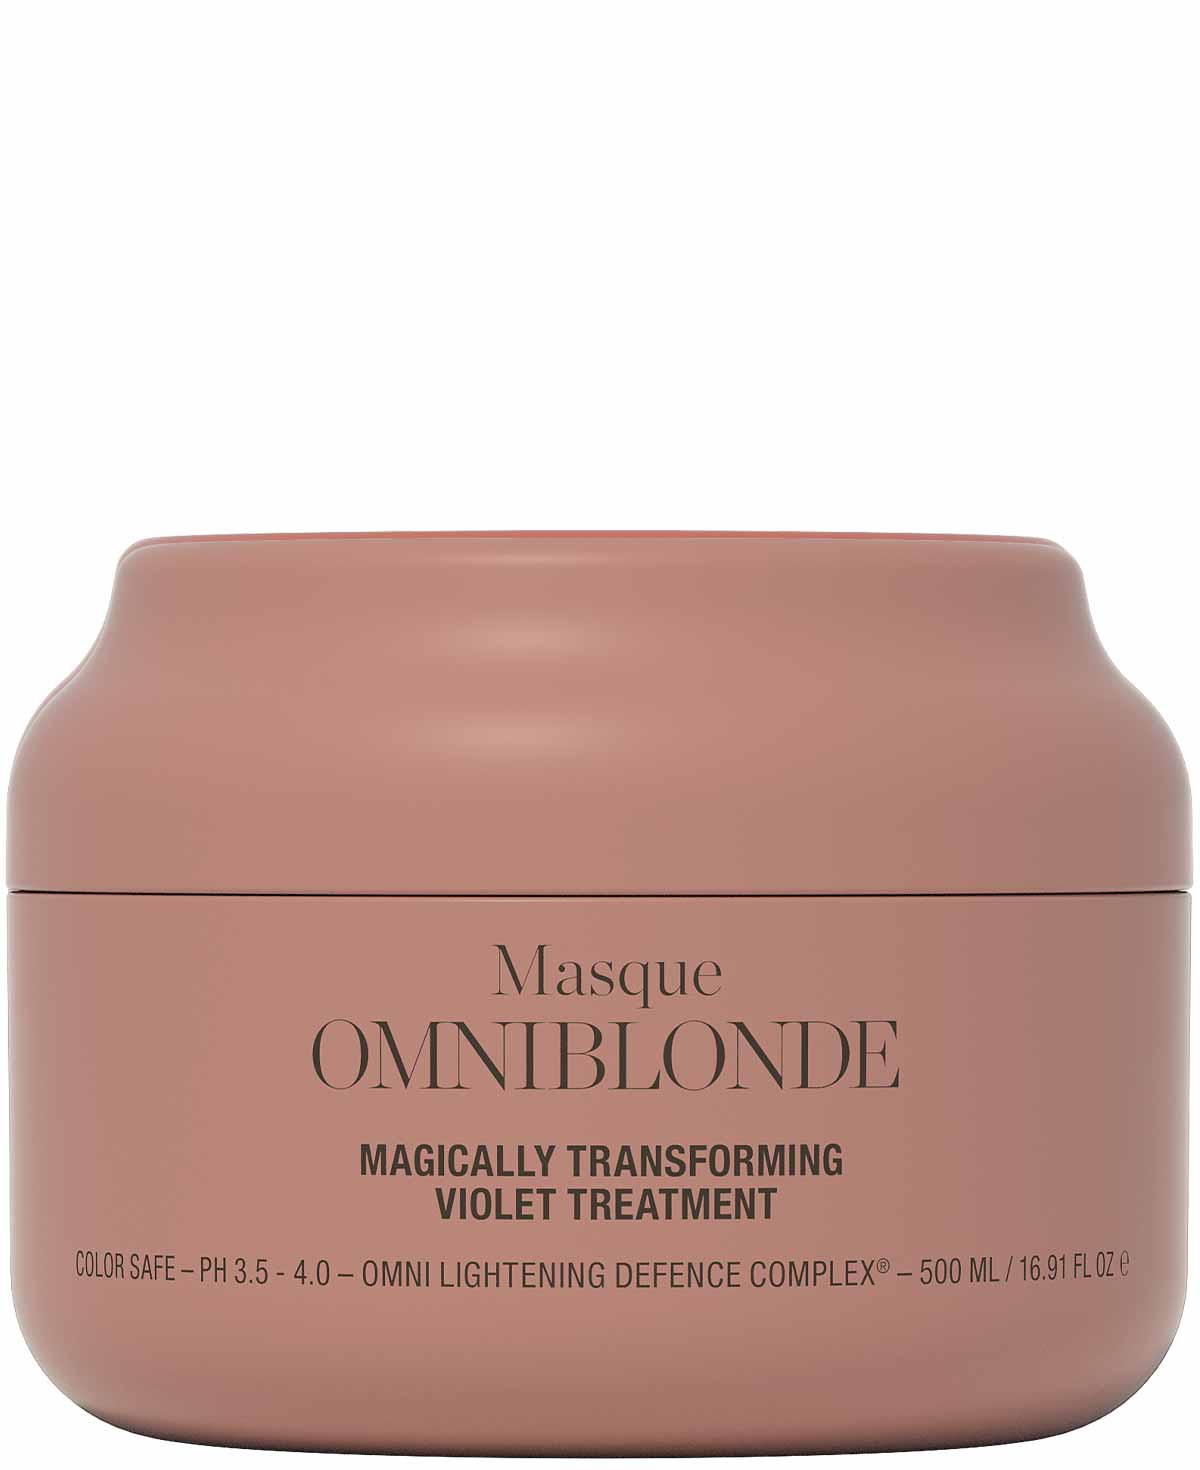 Omniblonde Magically Transforming Violet Treatment 500ml